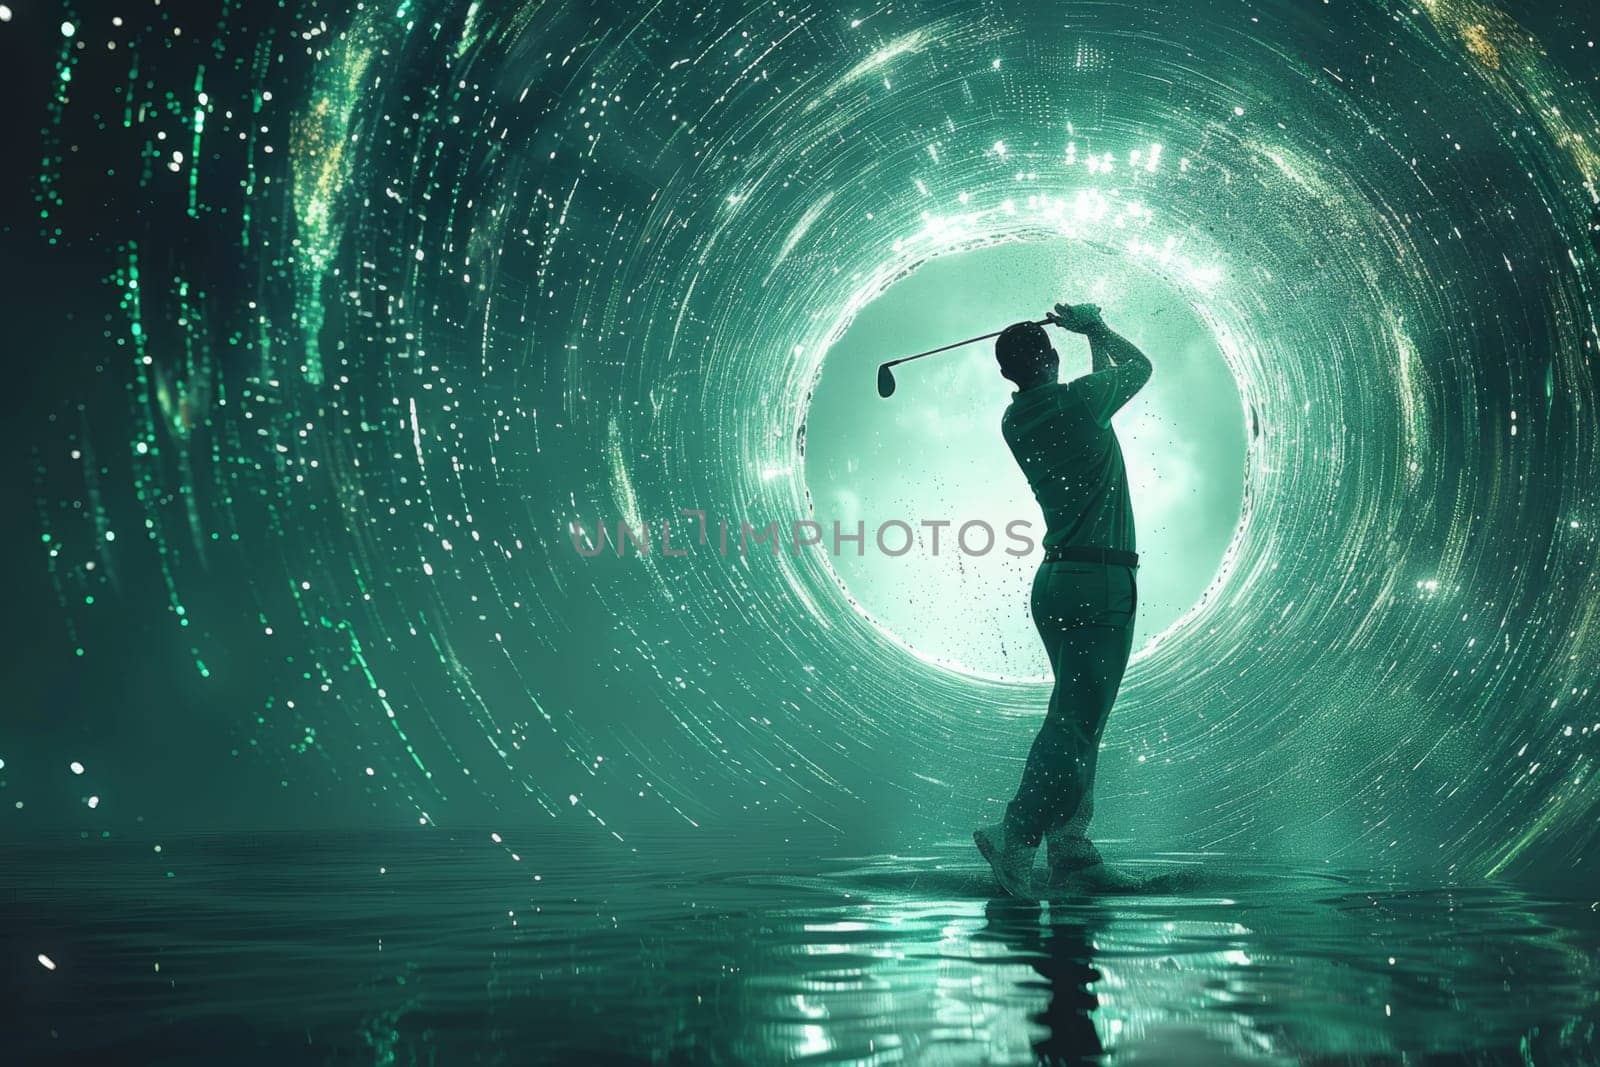 A golfer hits a ball on an abstract background. the concept of a healthy sports lifestyle on vacation.